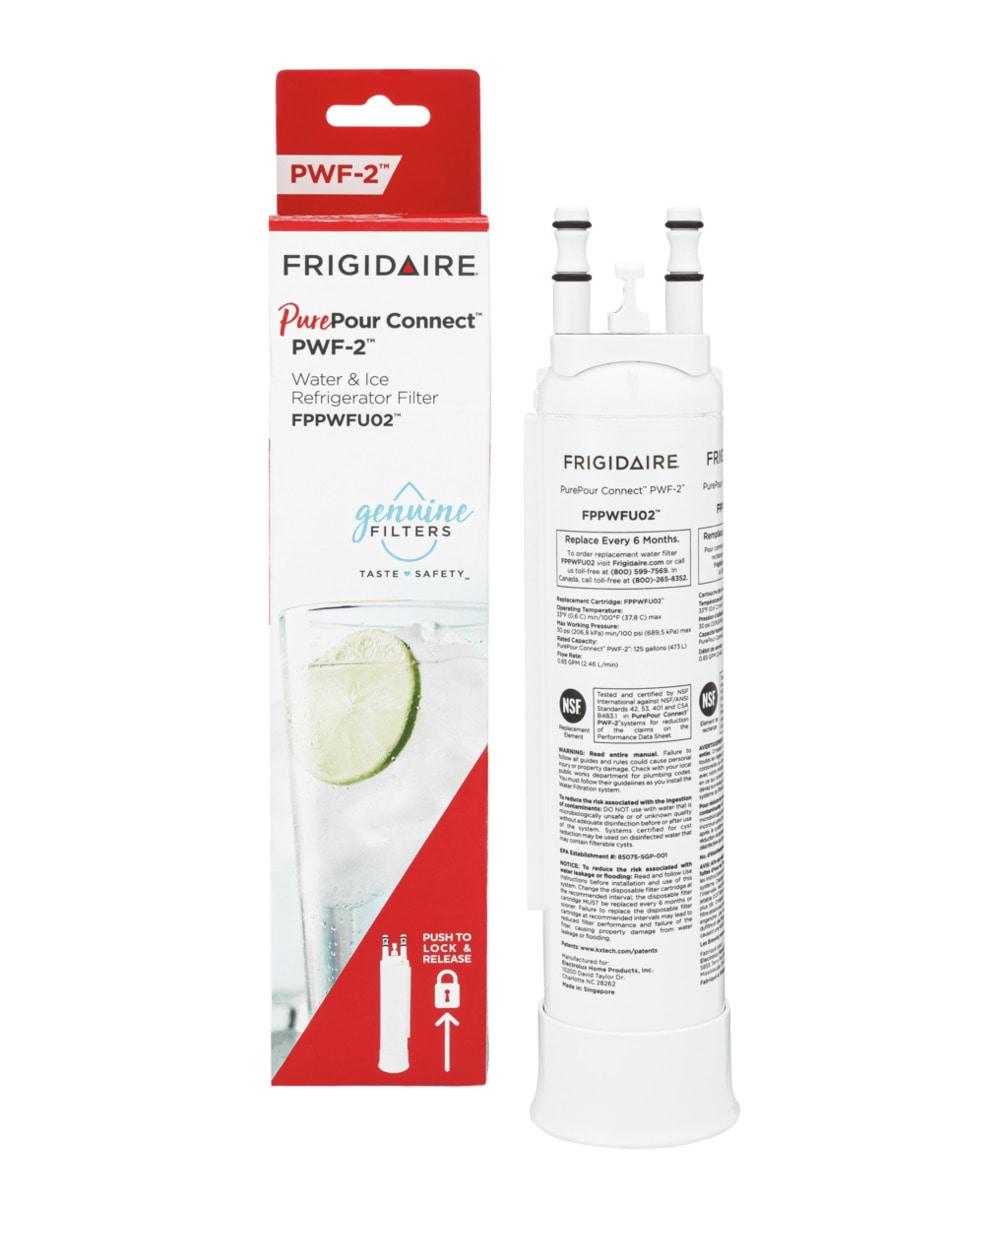 Frigidaire PurePour Connect™ PWF-2™ Water and Ice Refrigerator Filter